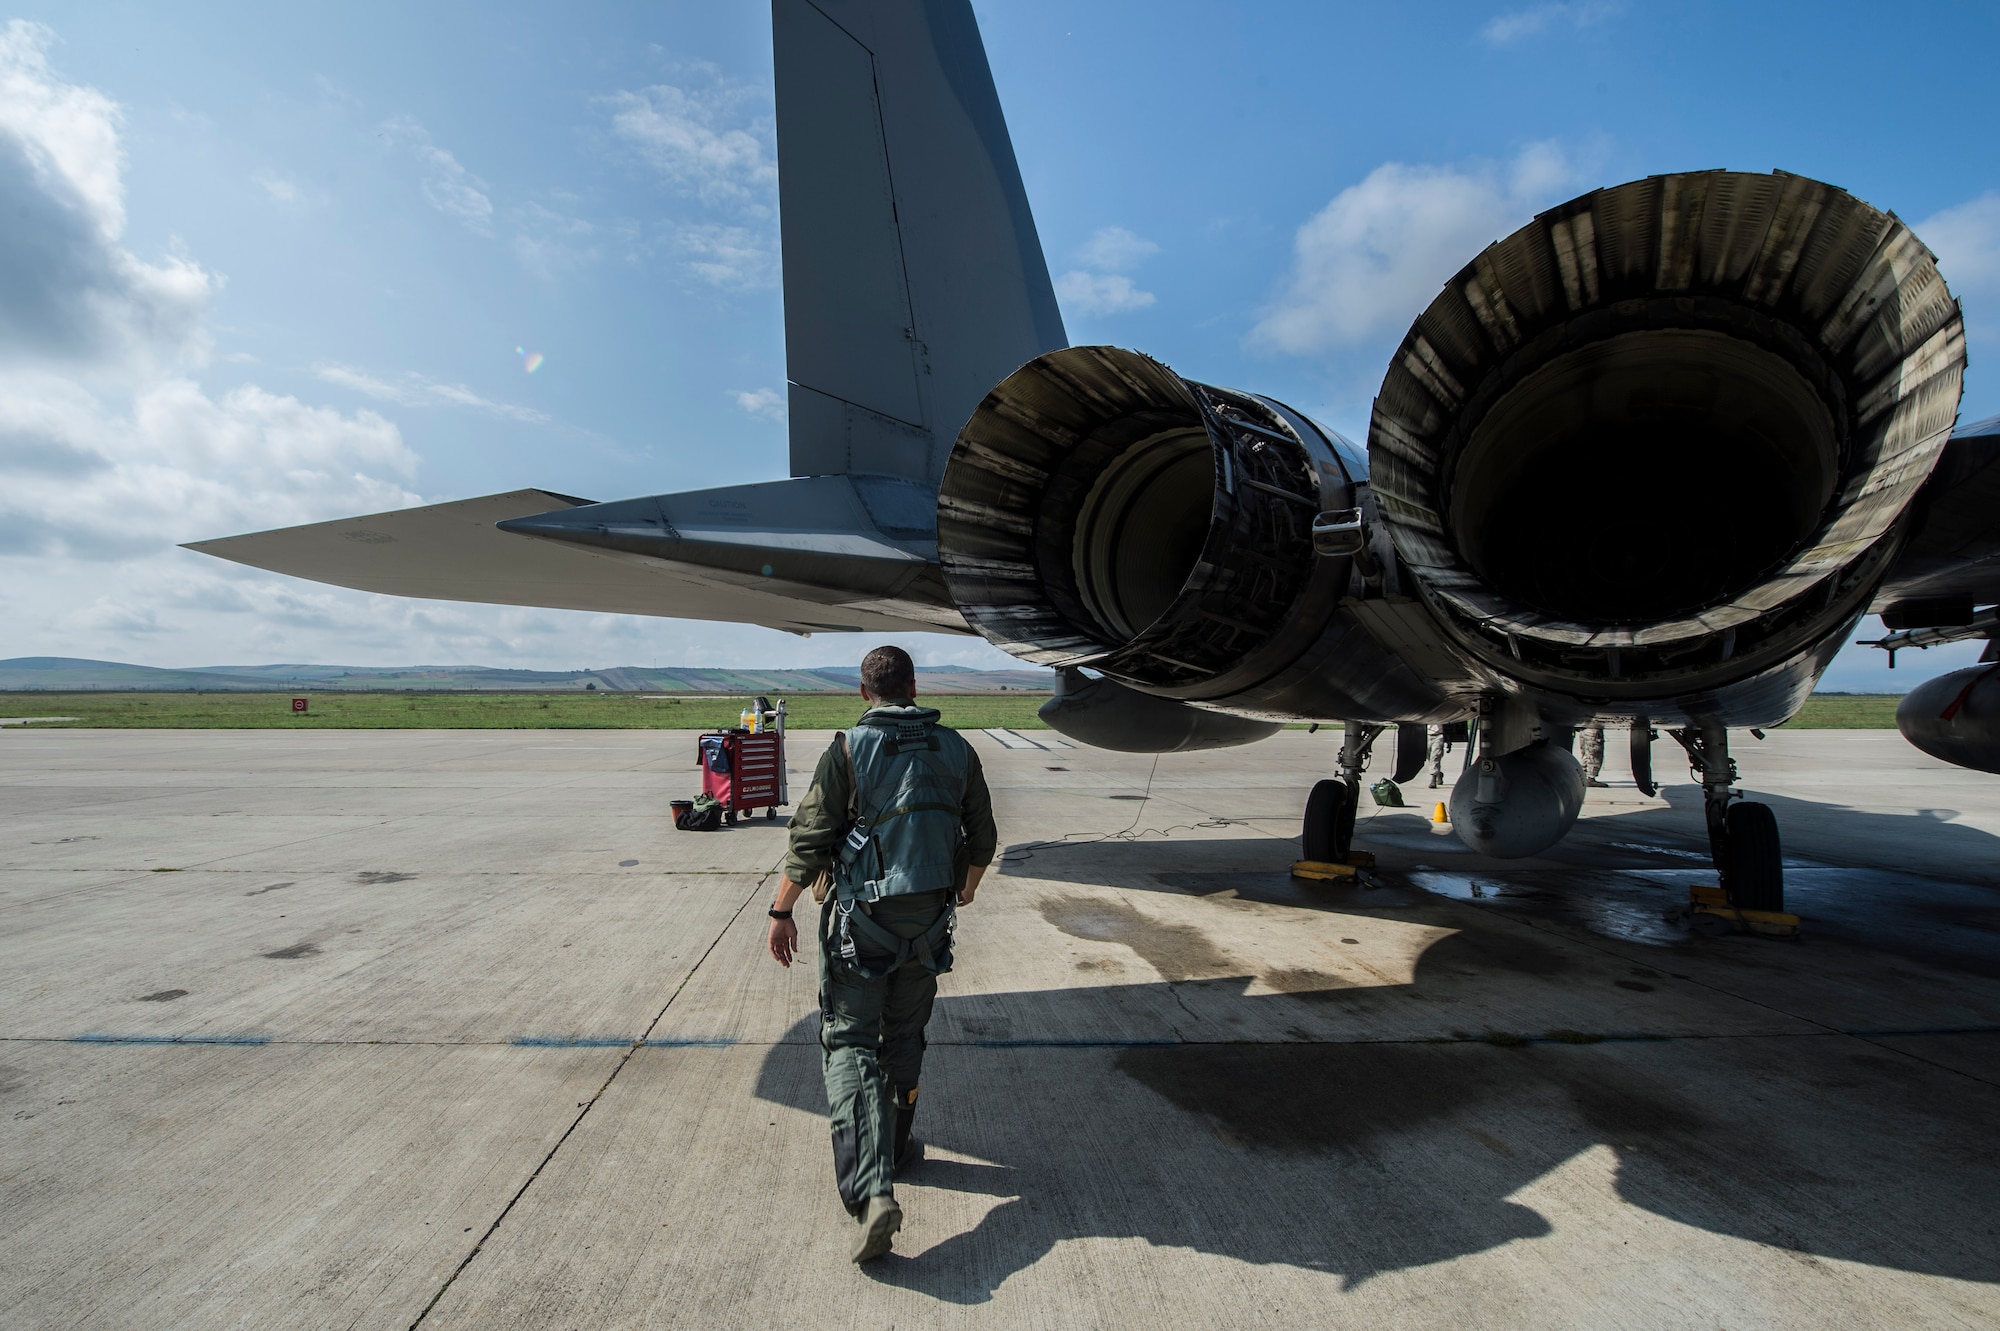 An F-15C Eagle fighter aircraft pilot assigned to the 123rd Expeditionary Fighter Squadron, 142nd Fighter Wing, Oregon Air National Guard, does a walk around his aircraft during a theater security package deployment Sept. 25, 2015, at Campia Turzii, Romania. The aircraft deployed to Romania in support of Operation Atlantic Resolve to bolster air power capabilities while underscoring the U.S. commitment to European security and stability. (U.S. Air Force photo by Staff Sgt. Christopher Ruano/Released)